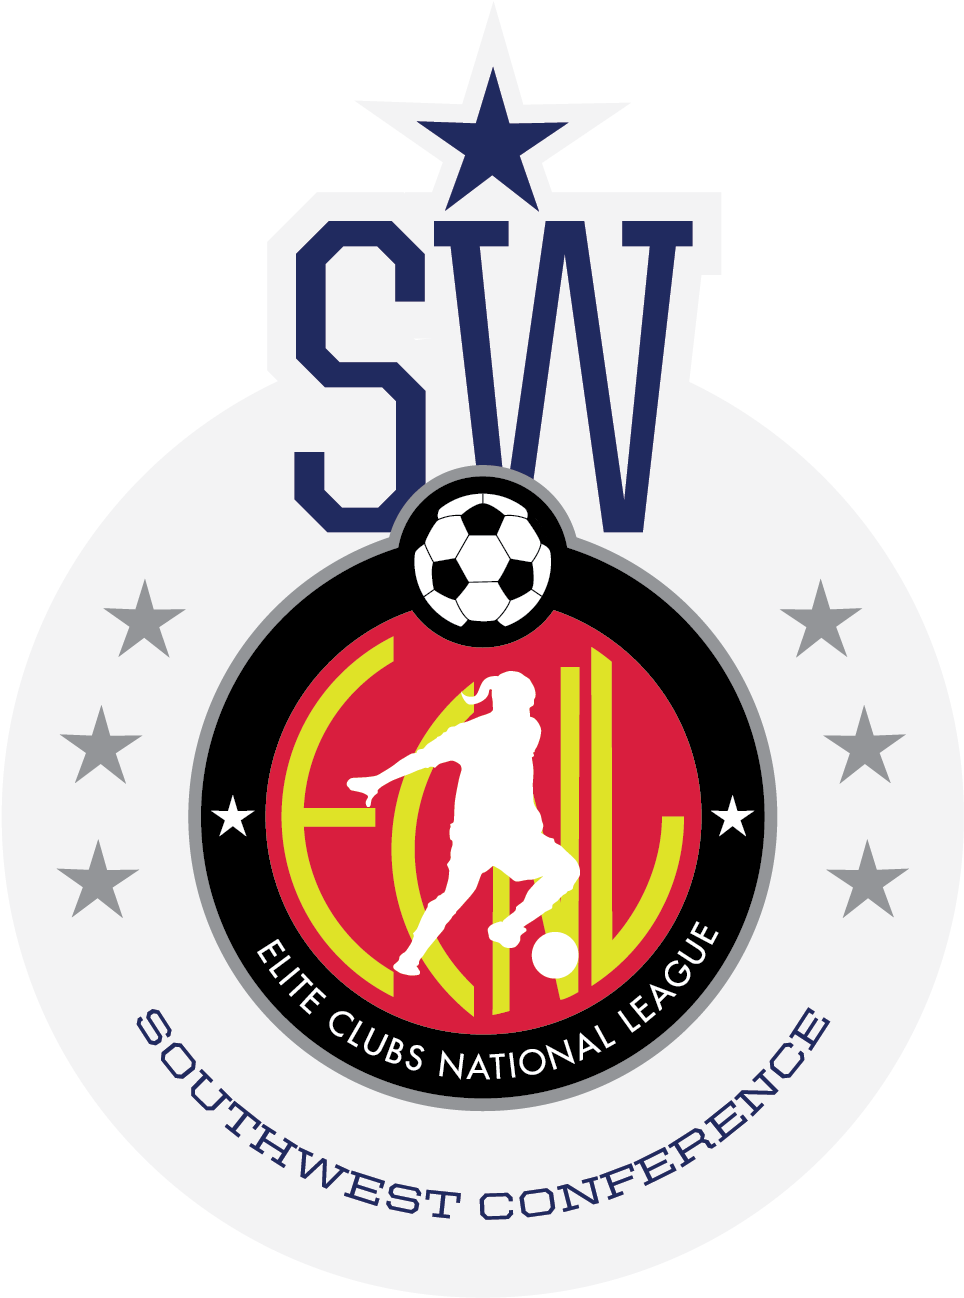 Southwest Conference - 2018 Ecnl Mid Atlantic Conference (1441x1441)